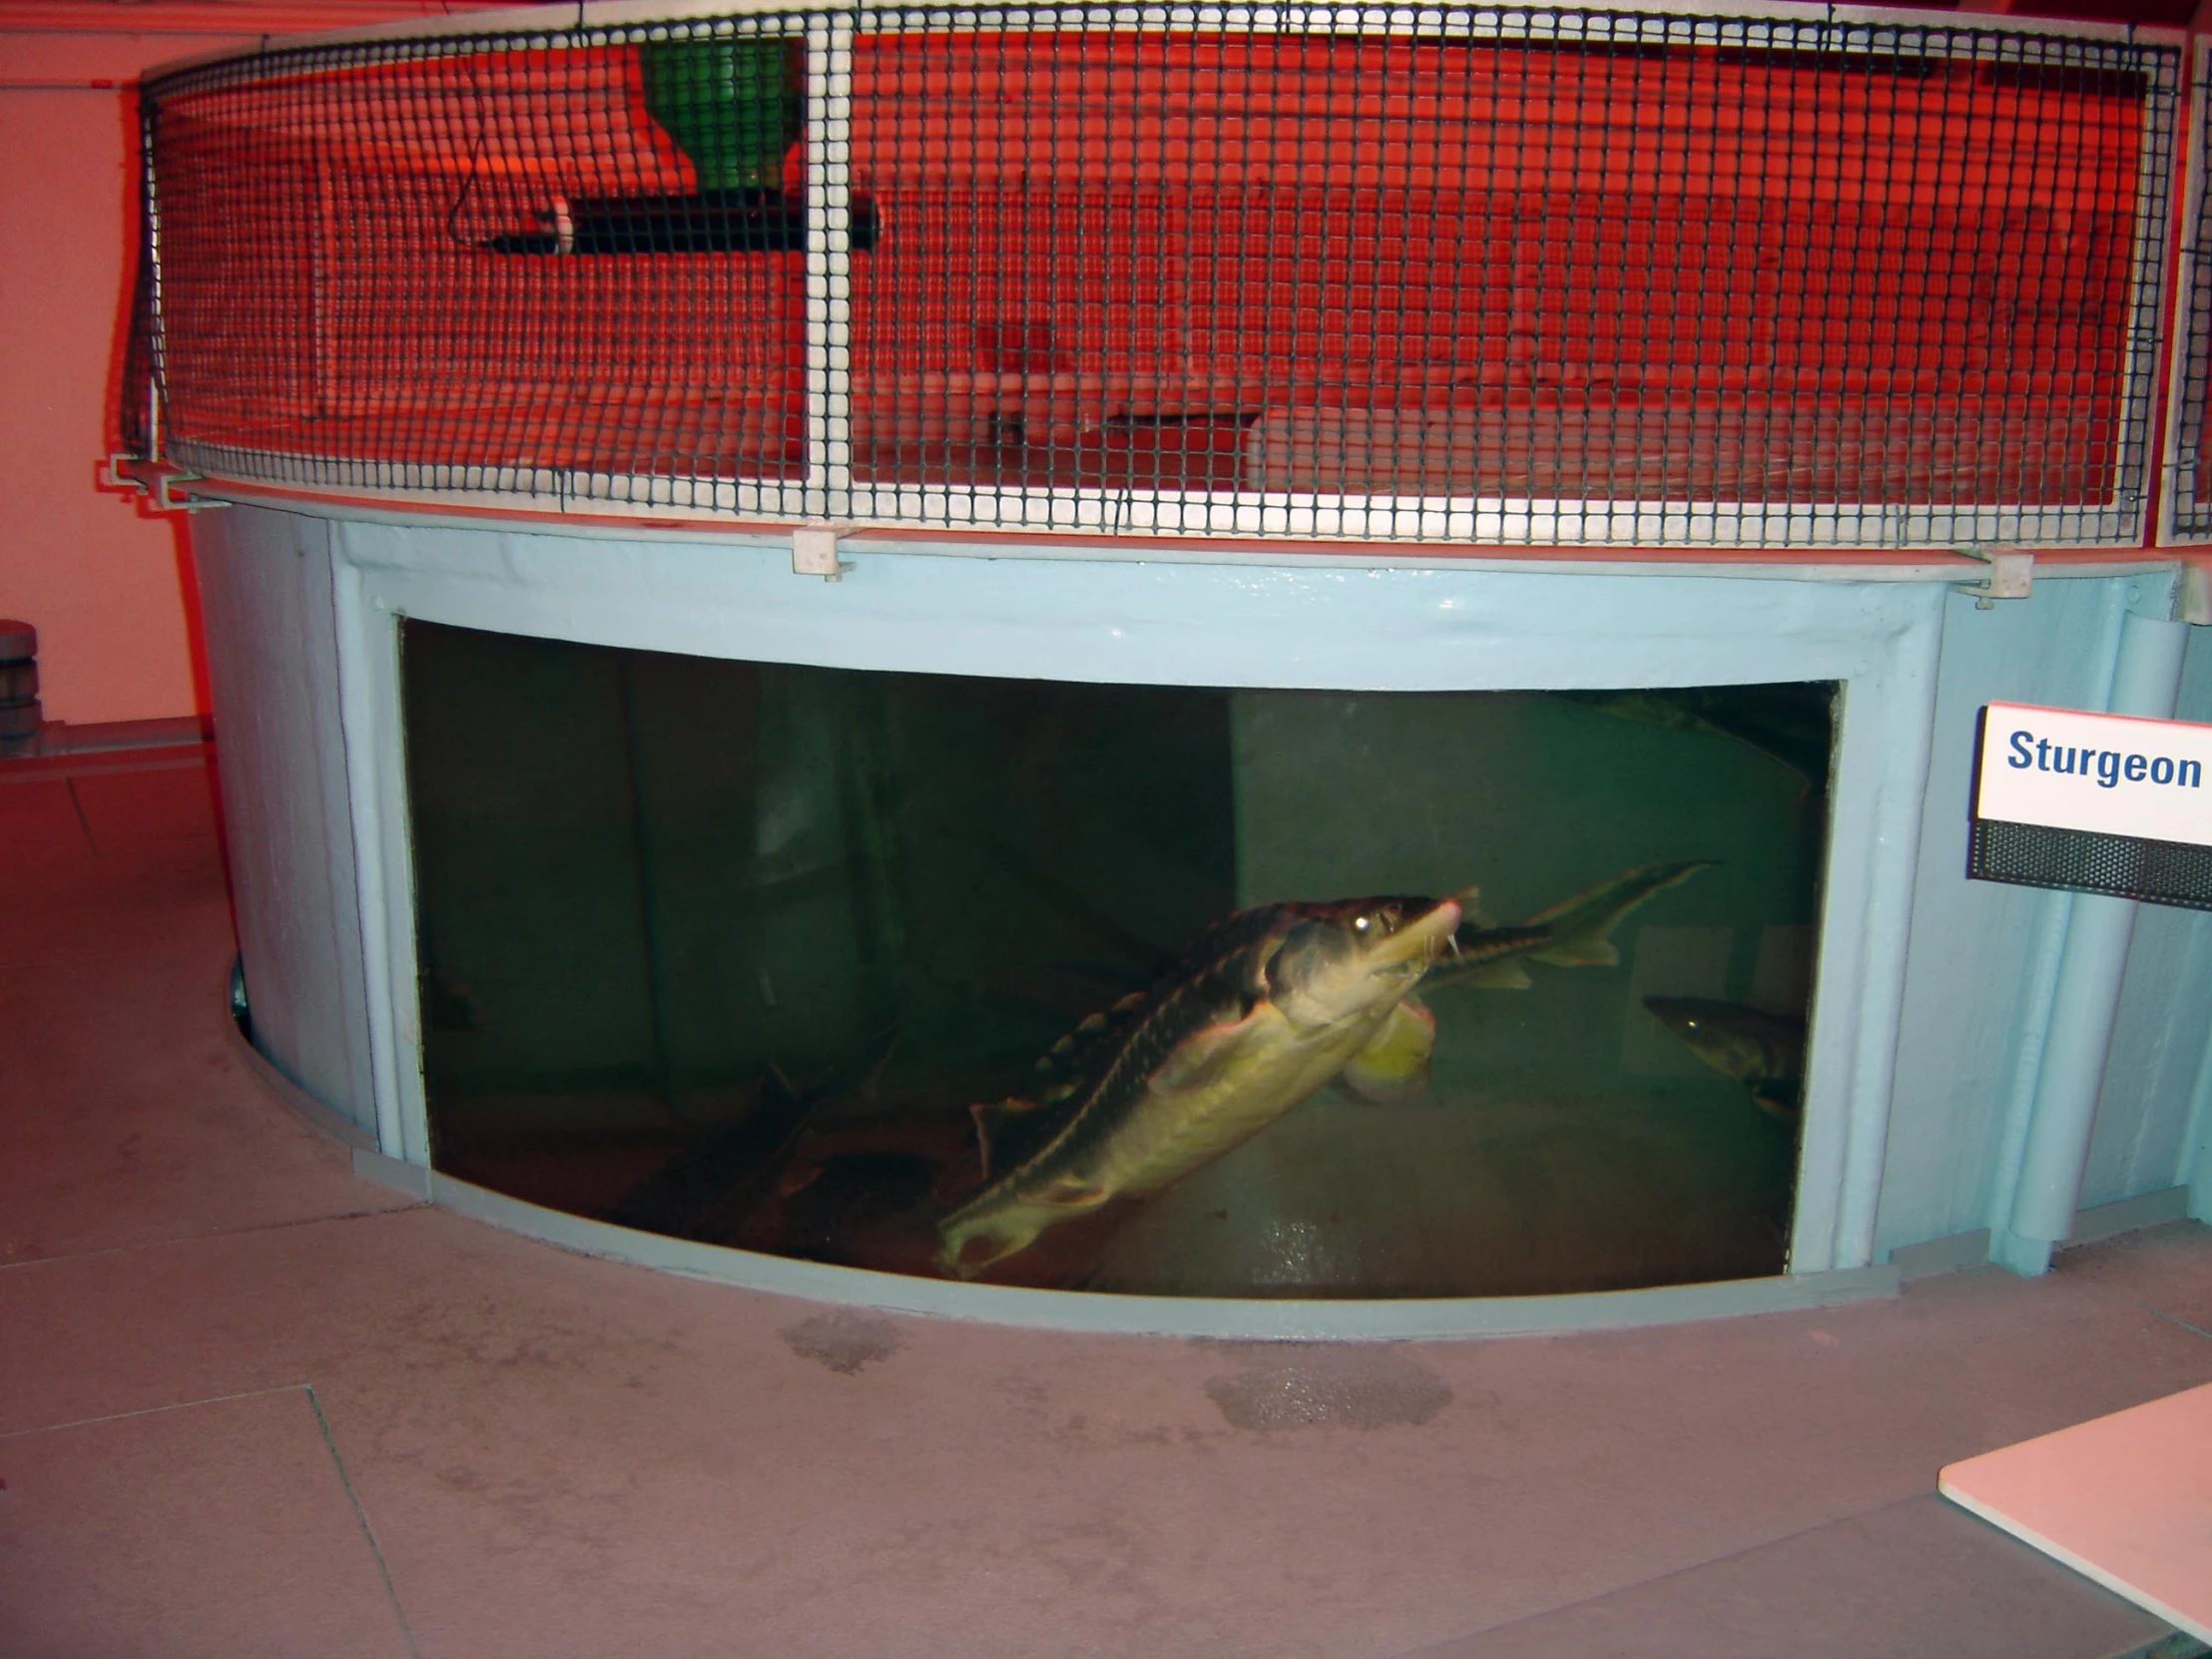 there is a fish inside a caged enclosure